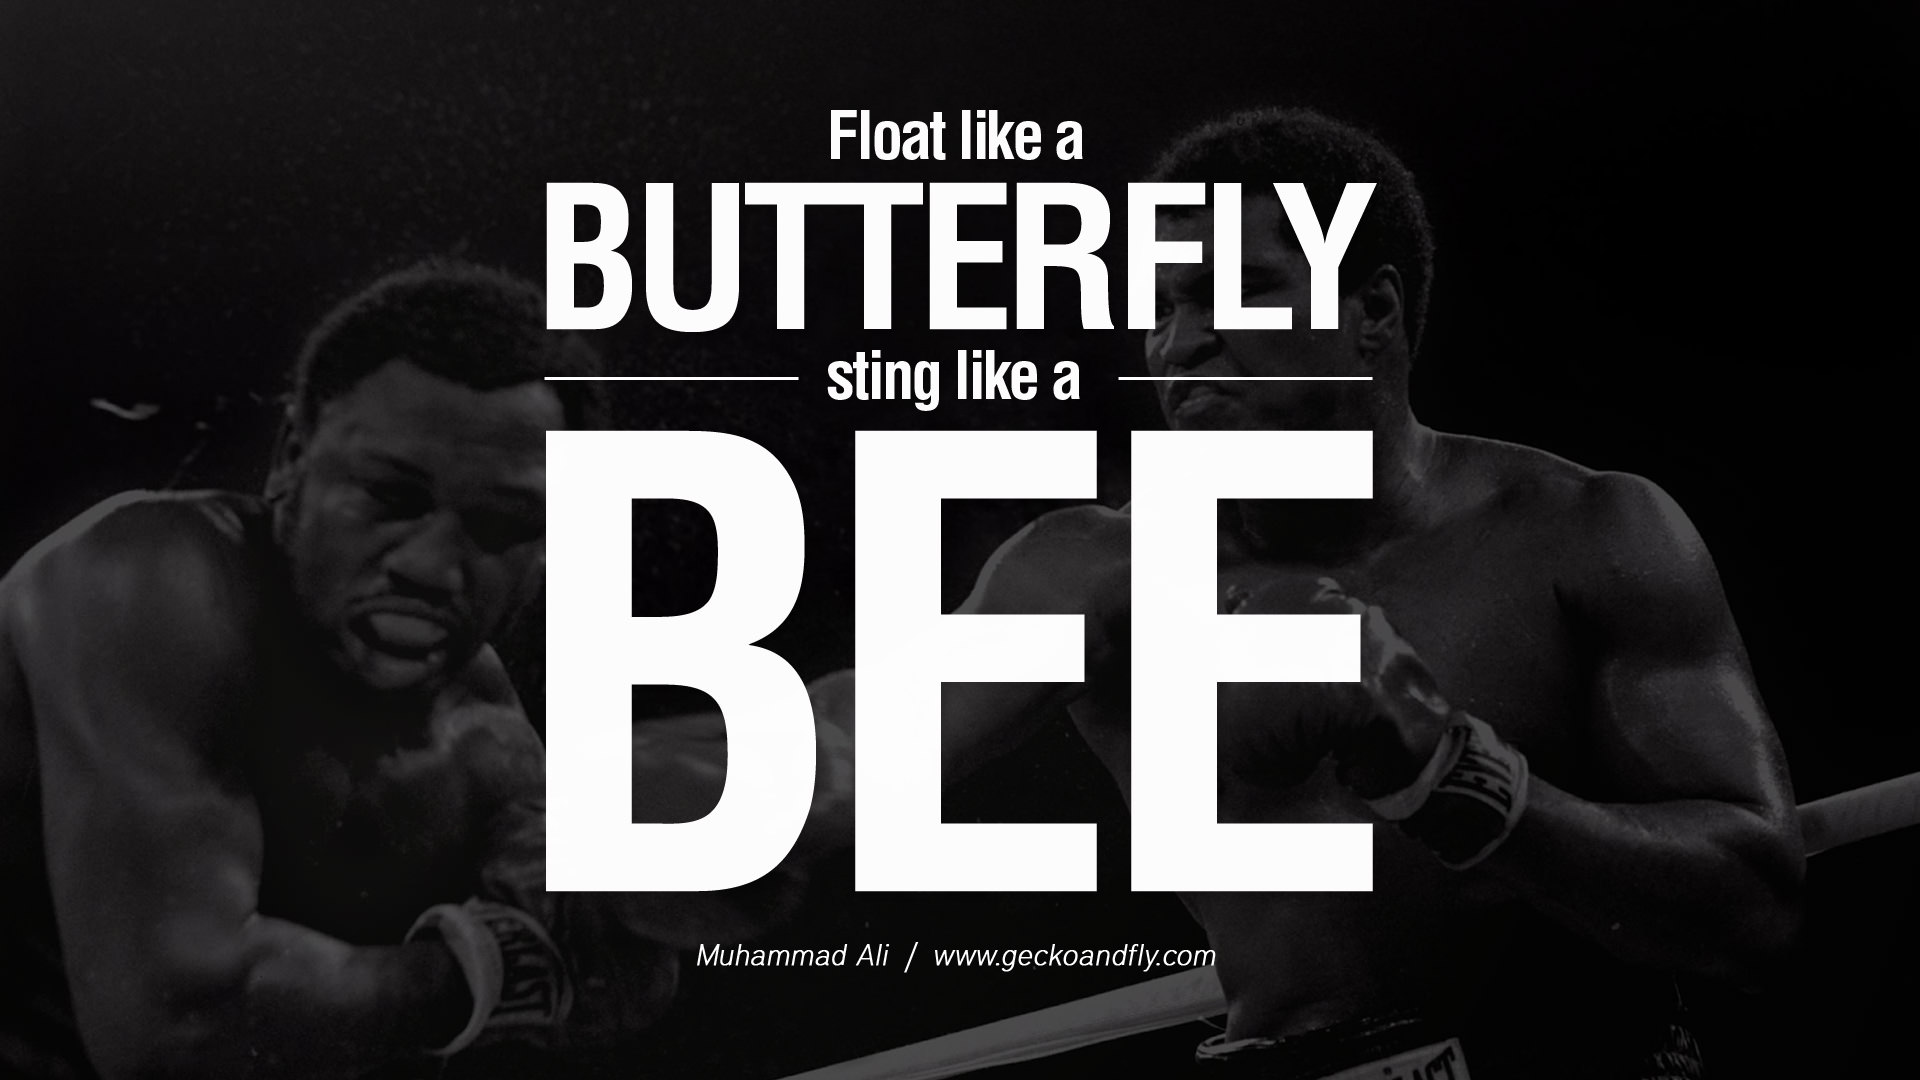 Fligh Like A Butterfly Muhammad Ali Quotes Quotesgram